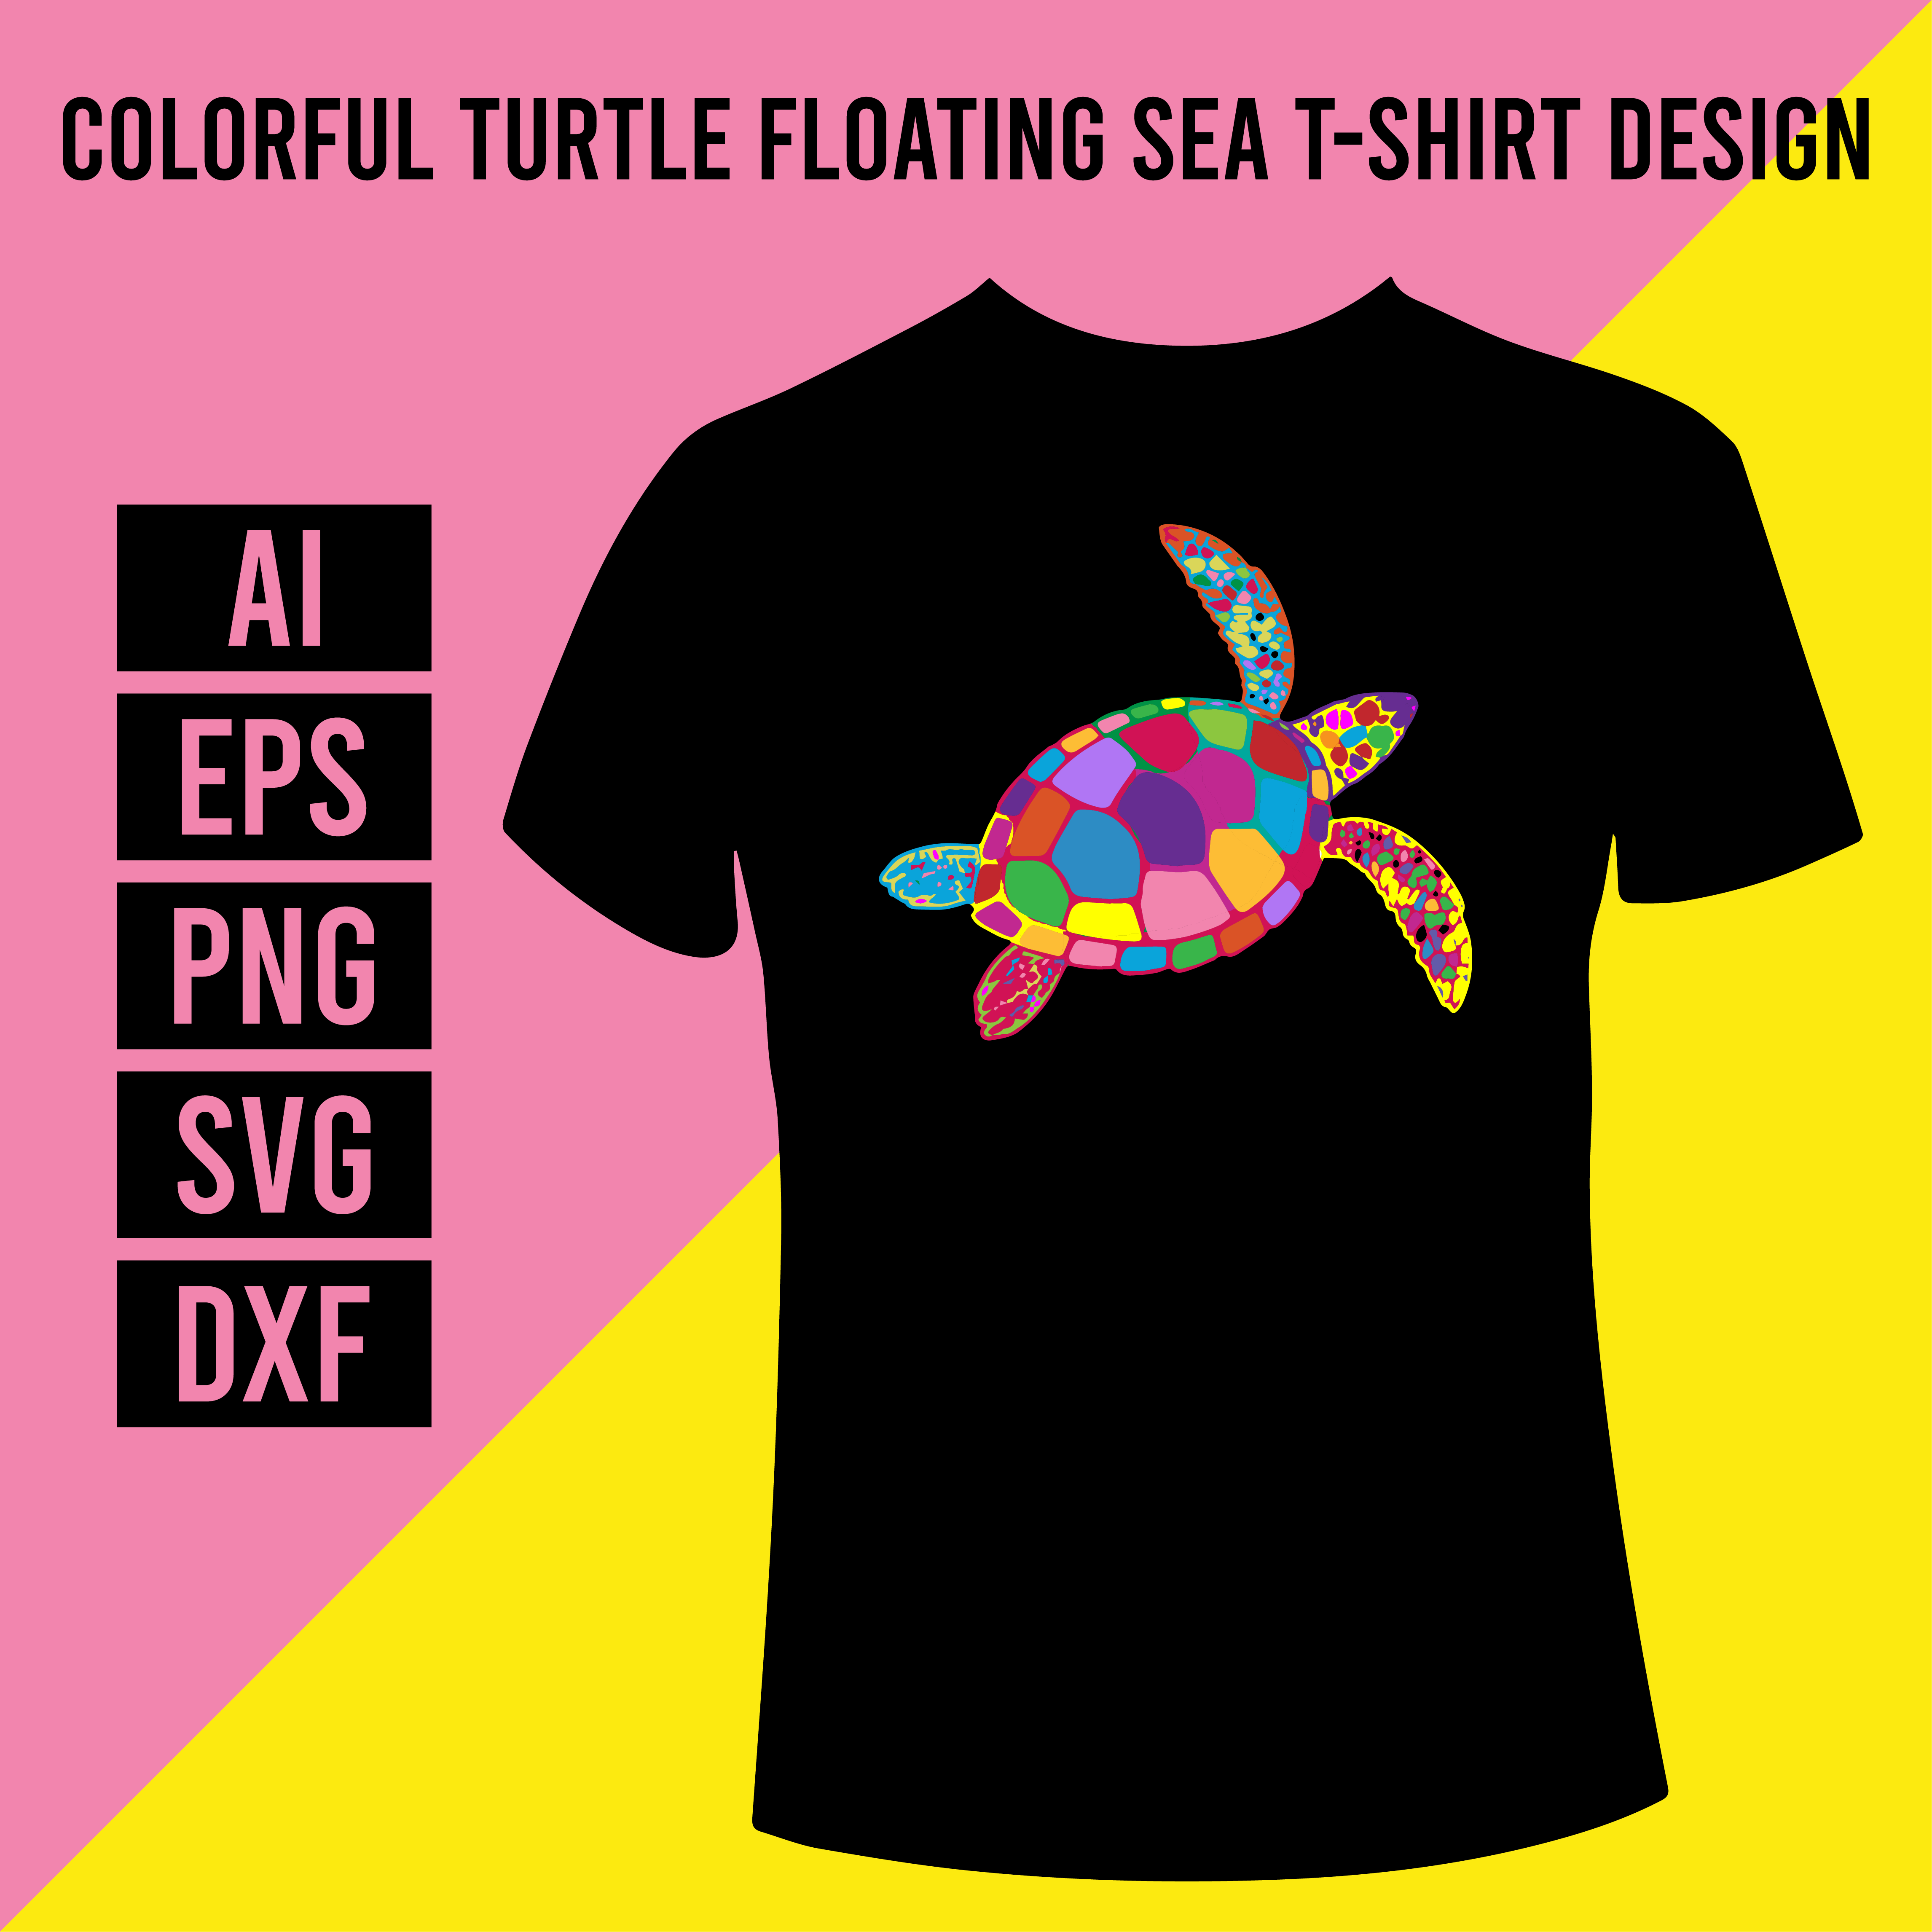 Colorful Turtle Floating Sea T-Shirt Design cover image.